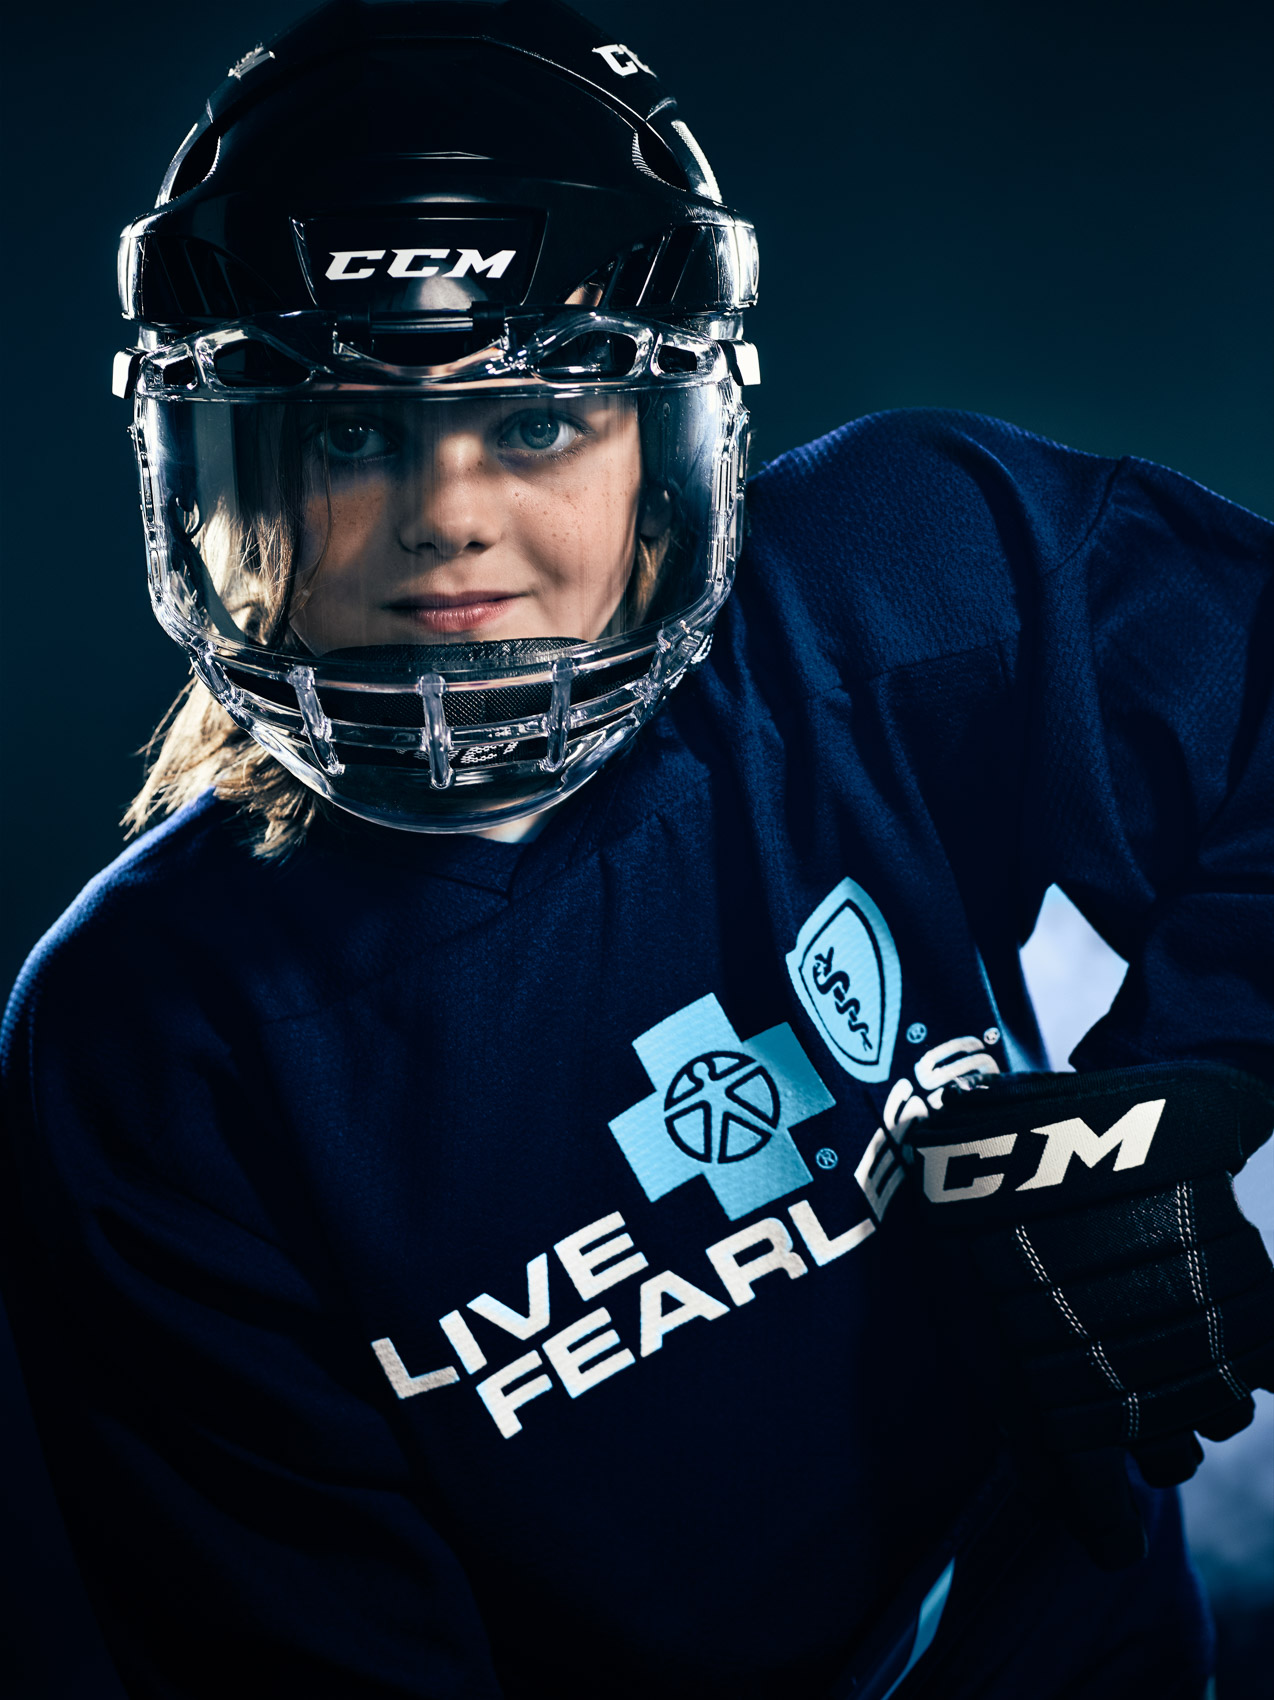 LIVE FEARLESS  — YOUTH HOCKEY PLAYER FOR BCBS WESTERN NEW YORK